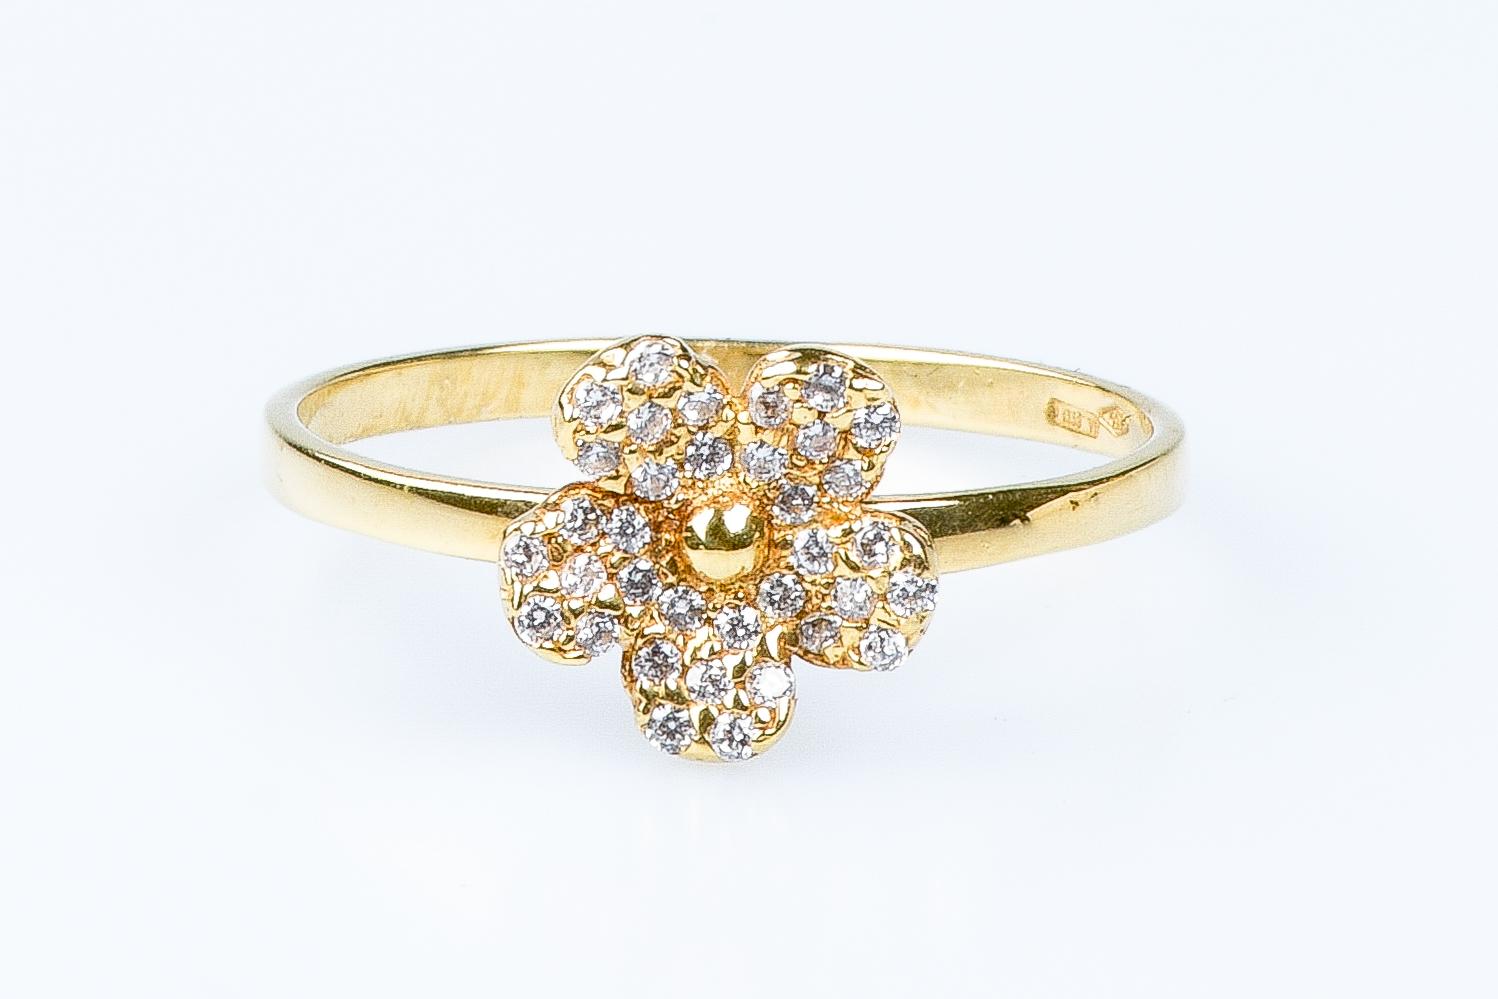 18 carat yellow gold ring designed with 34 zirconium oxides.

 Weight : 2.20 gr. 

Size: EU : 59 - ESP/IT : 19 - US : 9

Dimensions : 0.70 x 0.70 cm 
Width : 0.20 cm

Jewel delivered in a luxurious box. 

Condition : Like new

18 carat gold eagle